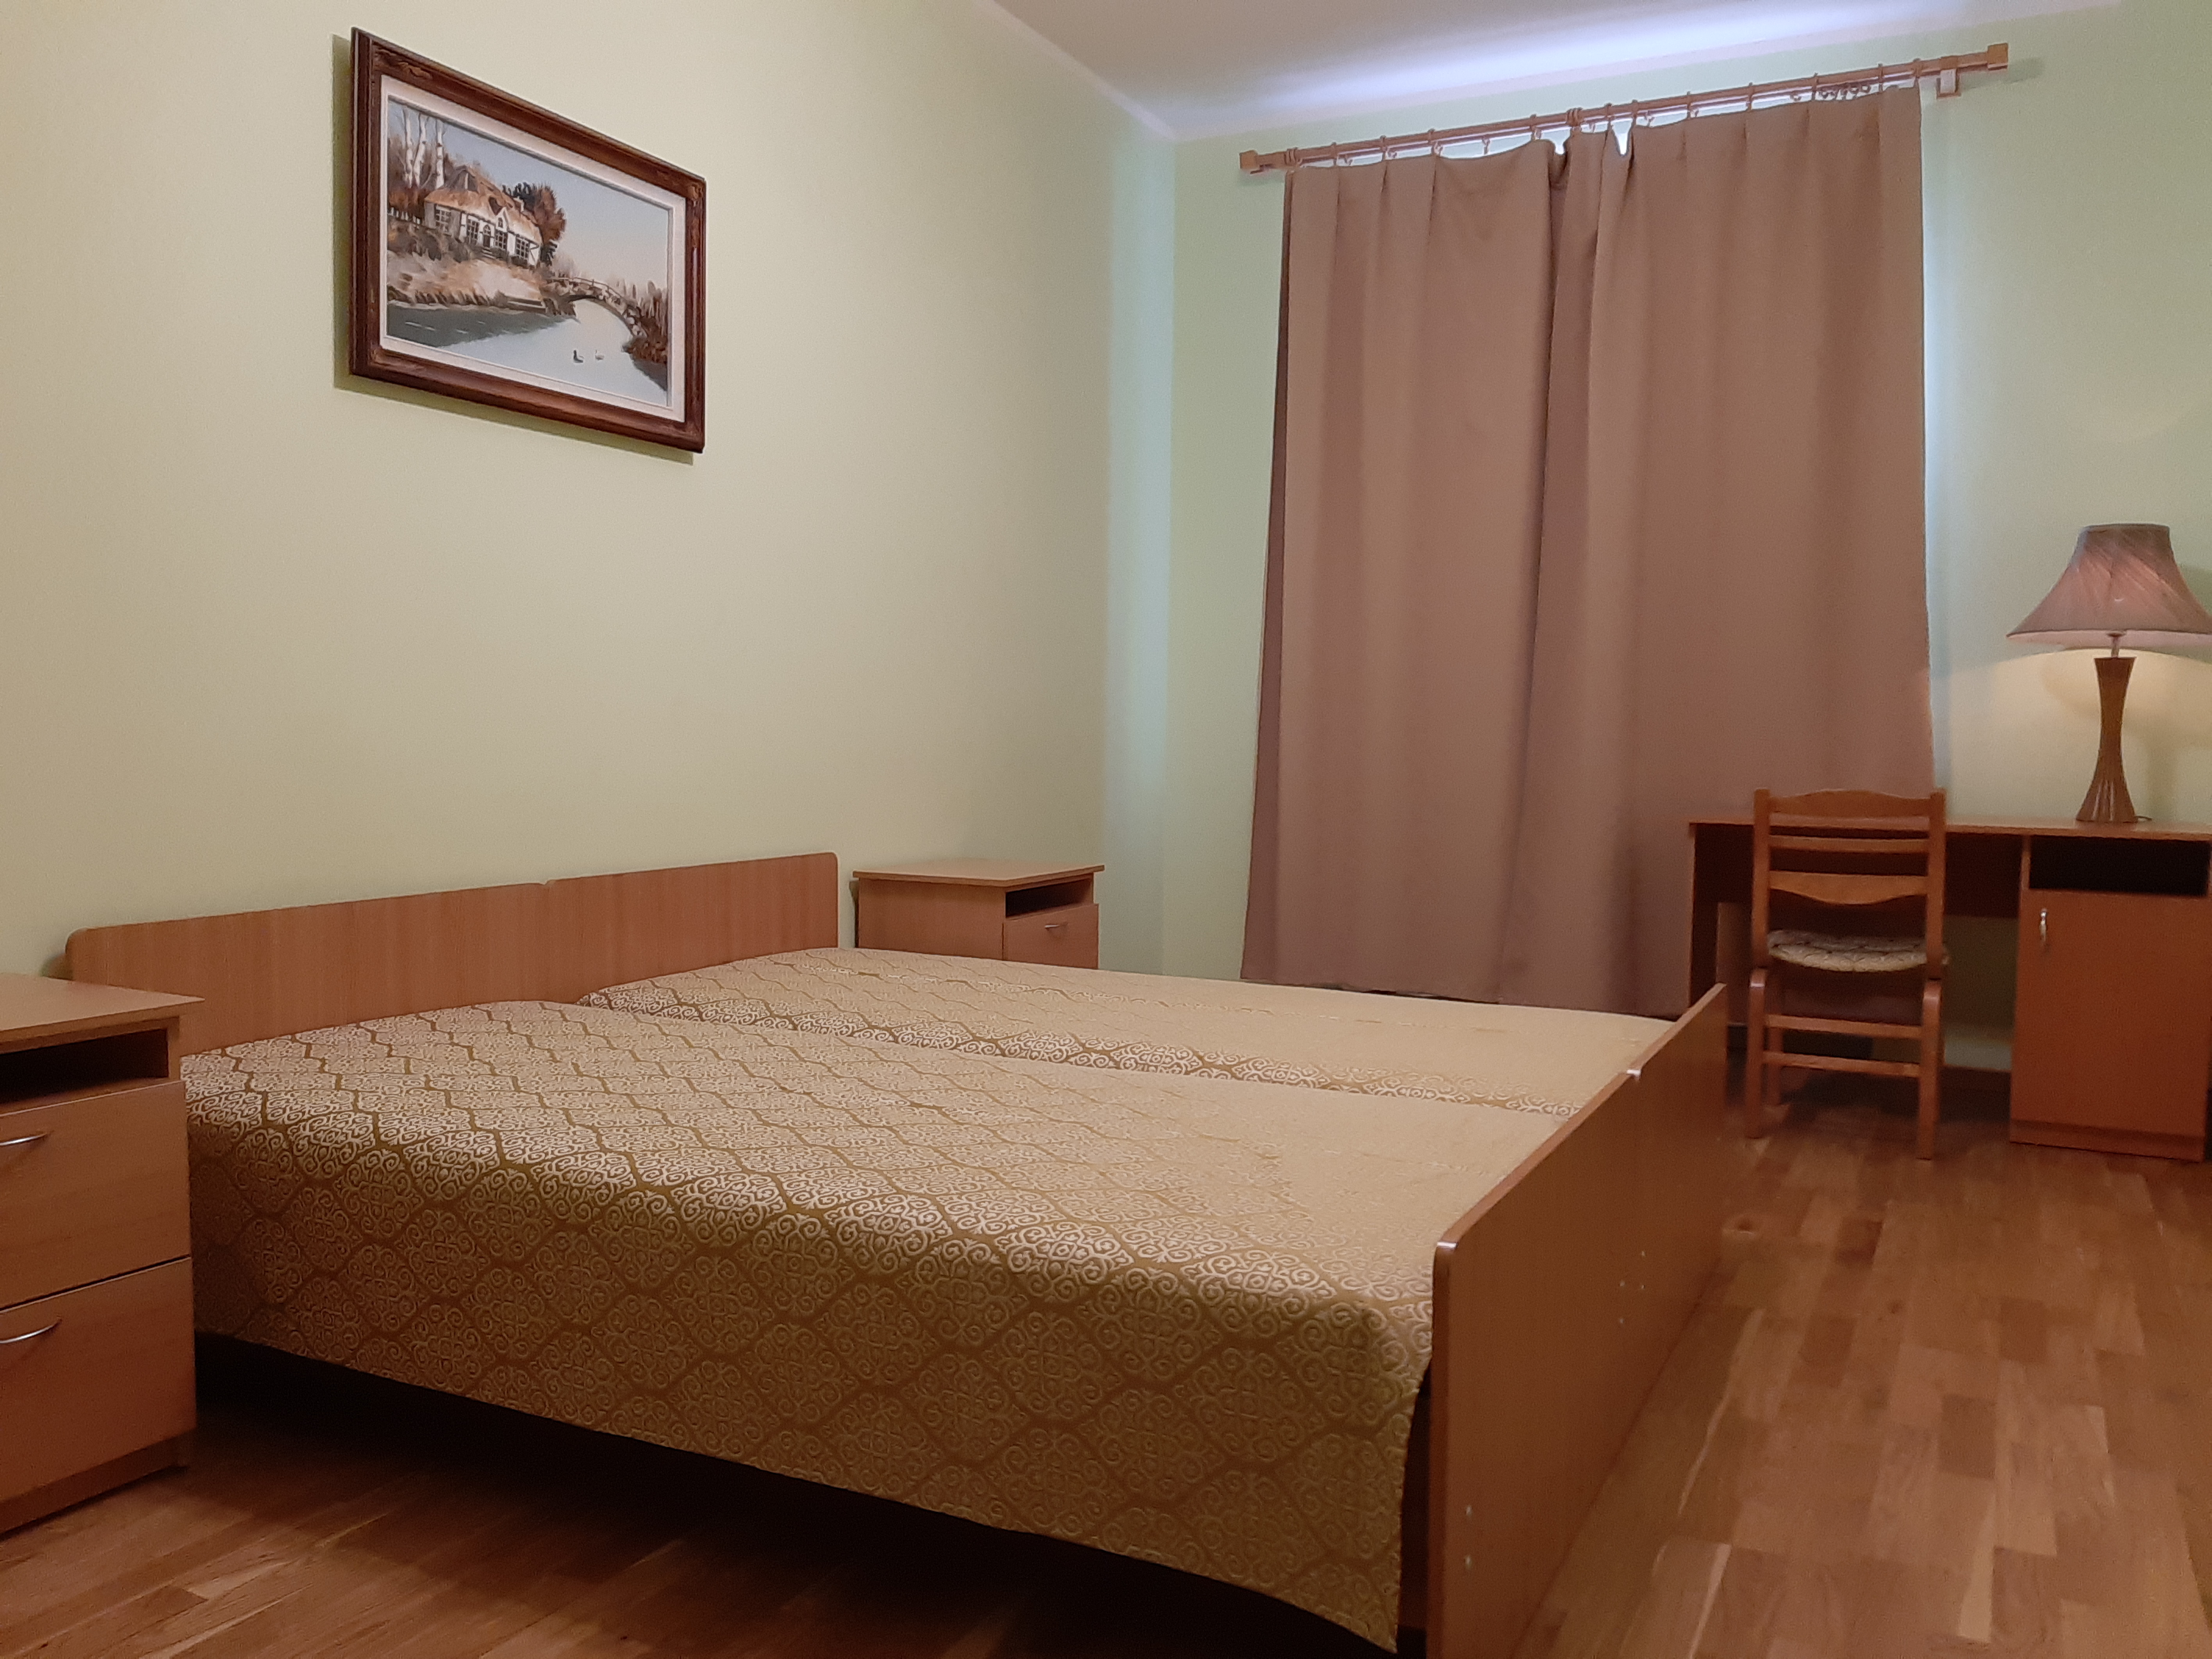 Apartment for rent, Stabu street 46 - Image 1